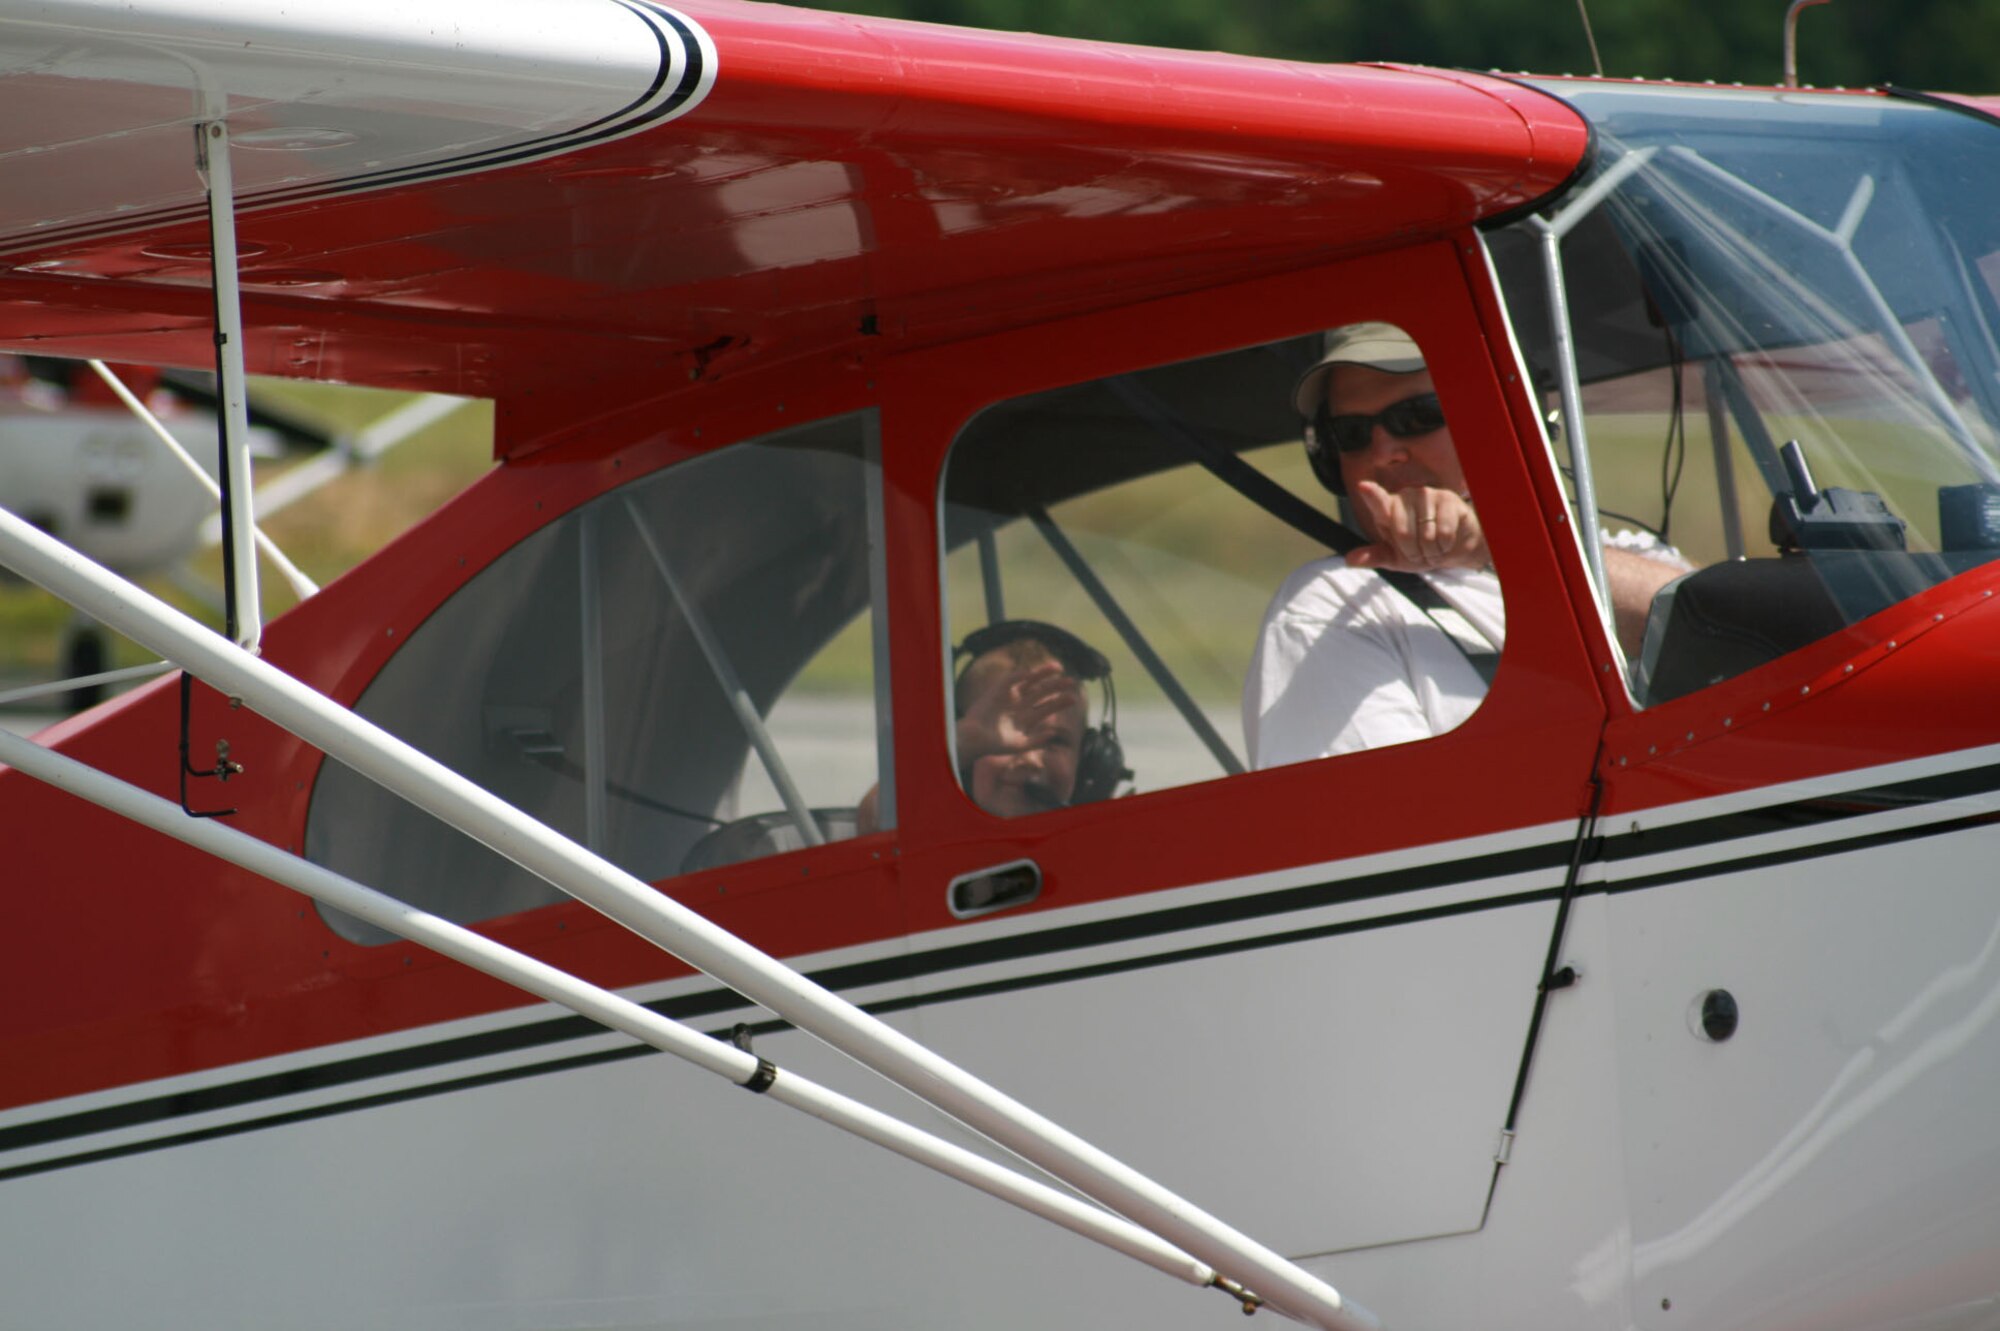 SEYMOUR JOHNSON AIR FORCE BASE, N.C. - Lt. Col. James Jinnette, 335th Fighter Squadron commander, flew four 1/2 year old Landry Waters in his Aeronca 7 Champion airplane during the Experimental Aircraft Association Young Eagles Day at the Goldsboro/Wayne County Municipal Airport May 24.  More than 80 base youth participated in the day's activity.  The EAA Young Eagles program was launched in 1992 to give interested young people an opportunity to go flying in a general aviation airplane. These flights are offered free of charge and are made possible through the EAA member volunteers. (U.S. Air Force photo by Staff Sgt. Les Waters)